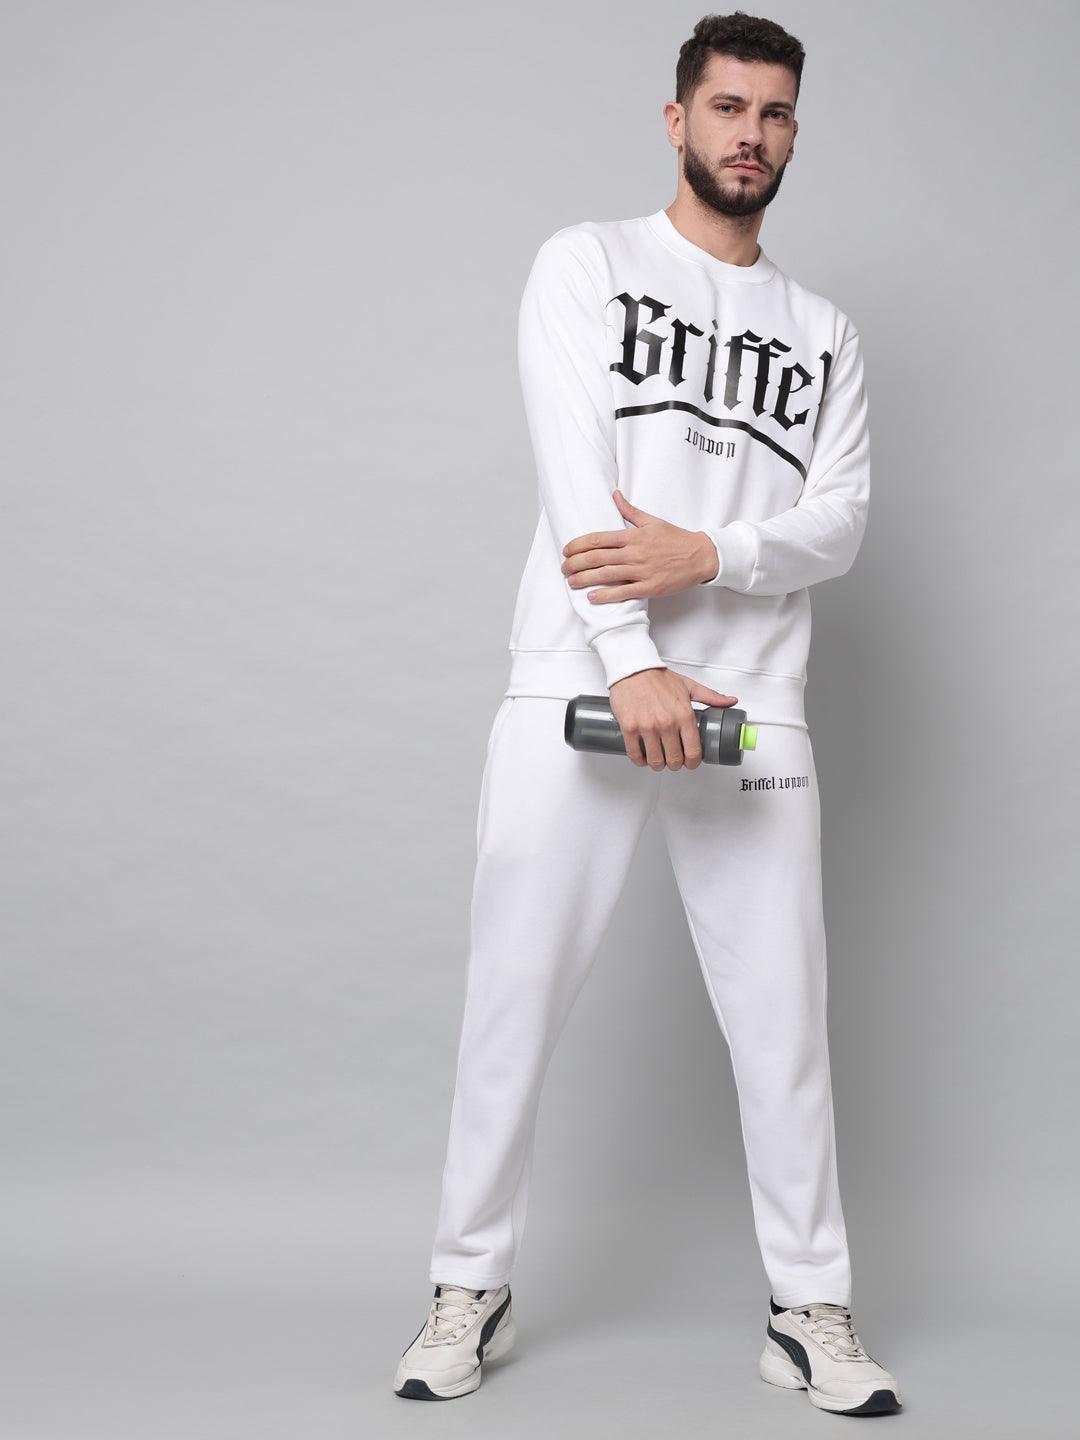 Griffel Men's Printed Solid Fleece Basic R-Neck Sweatshirt and Joggers Full set White Tracksuit - griffel